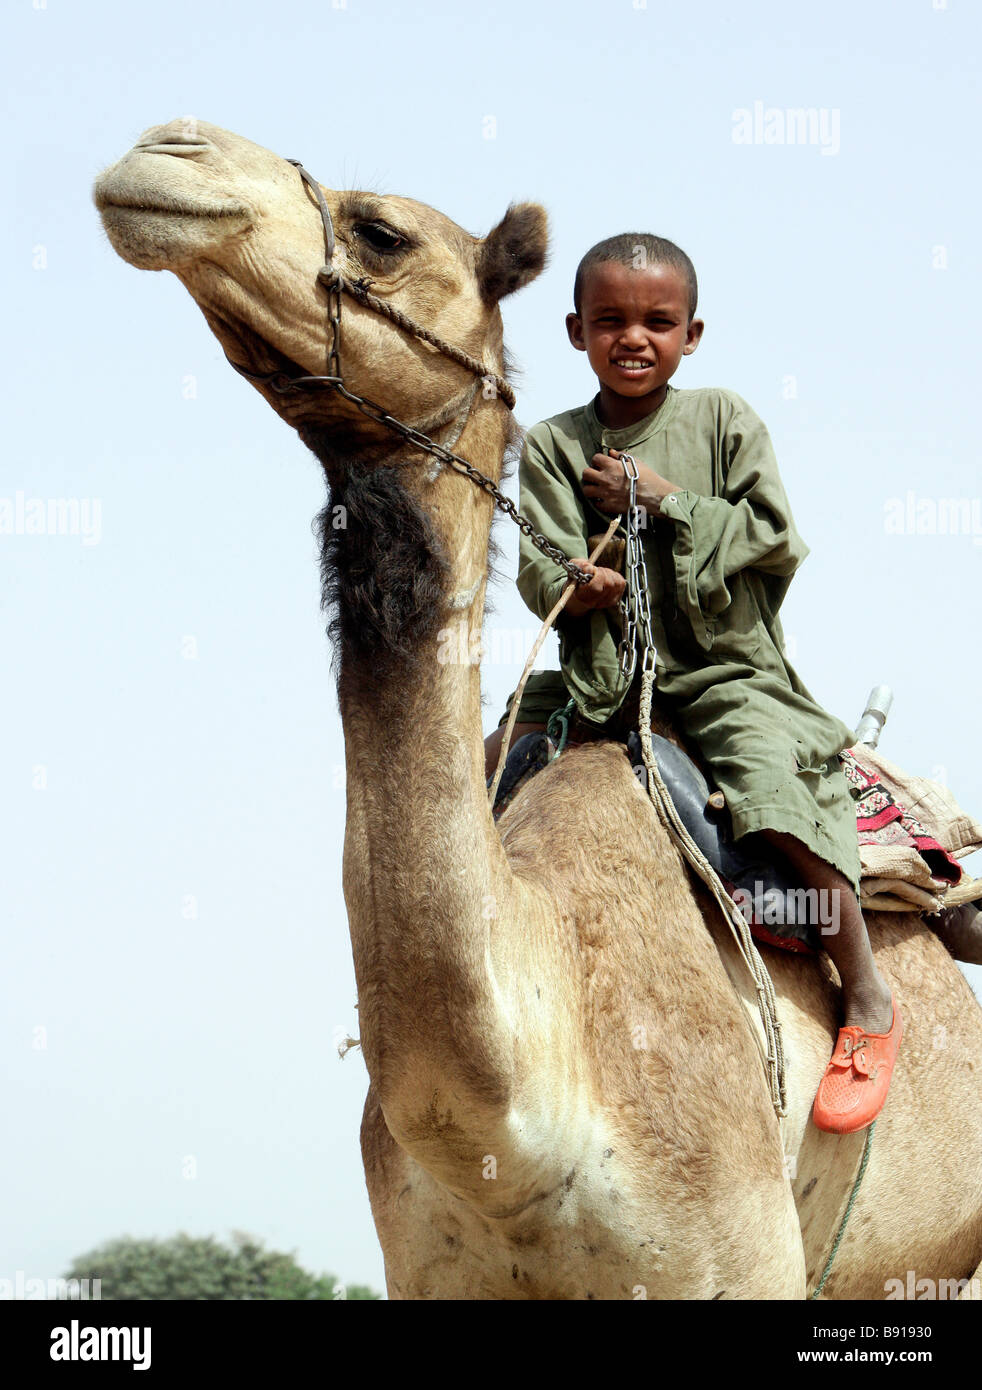 Nigeria: young nomad boy riding on the back of his camel Stock Photo